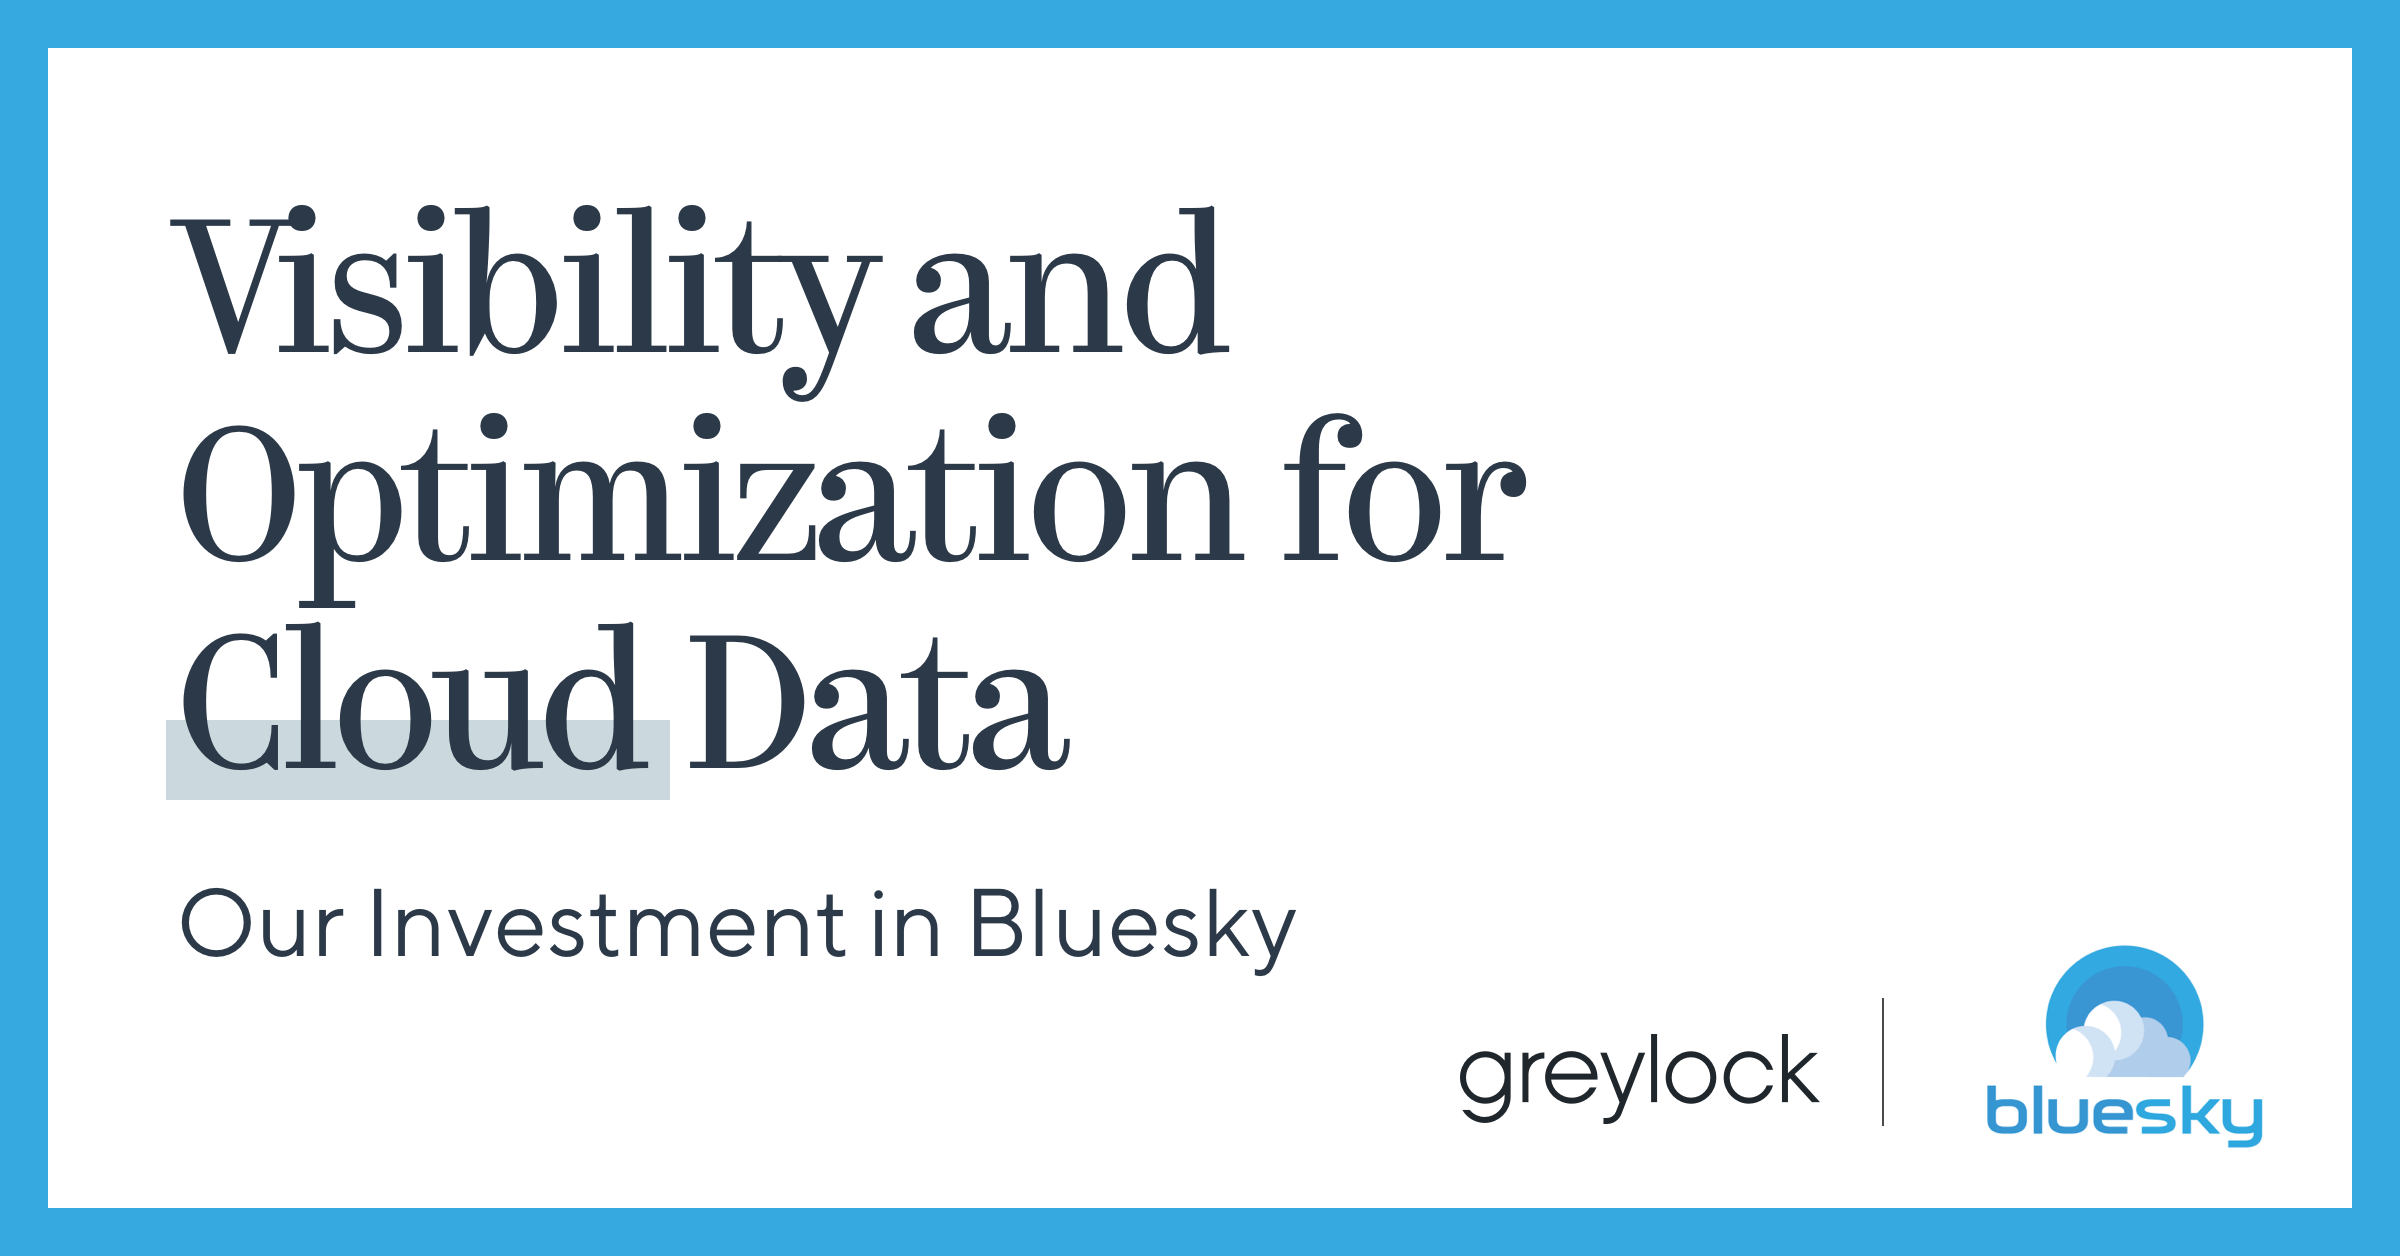 Visibility and Optimization for Cloud Data